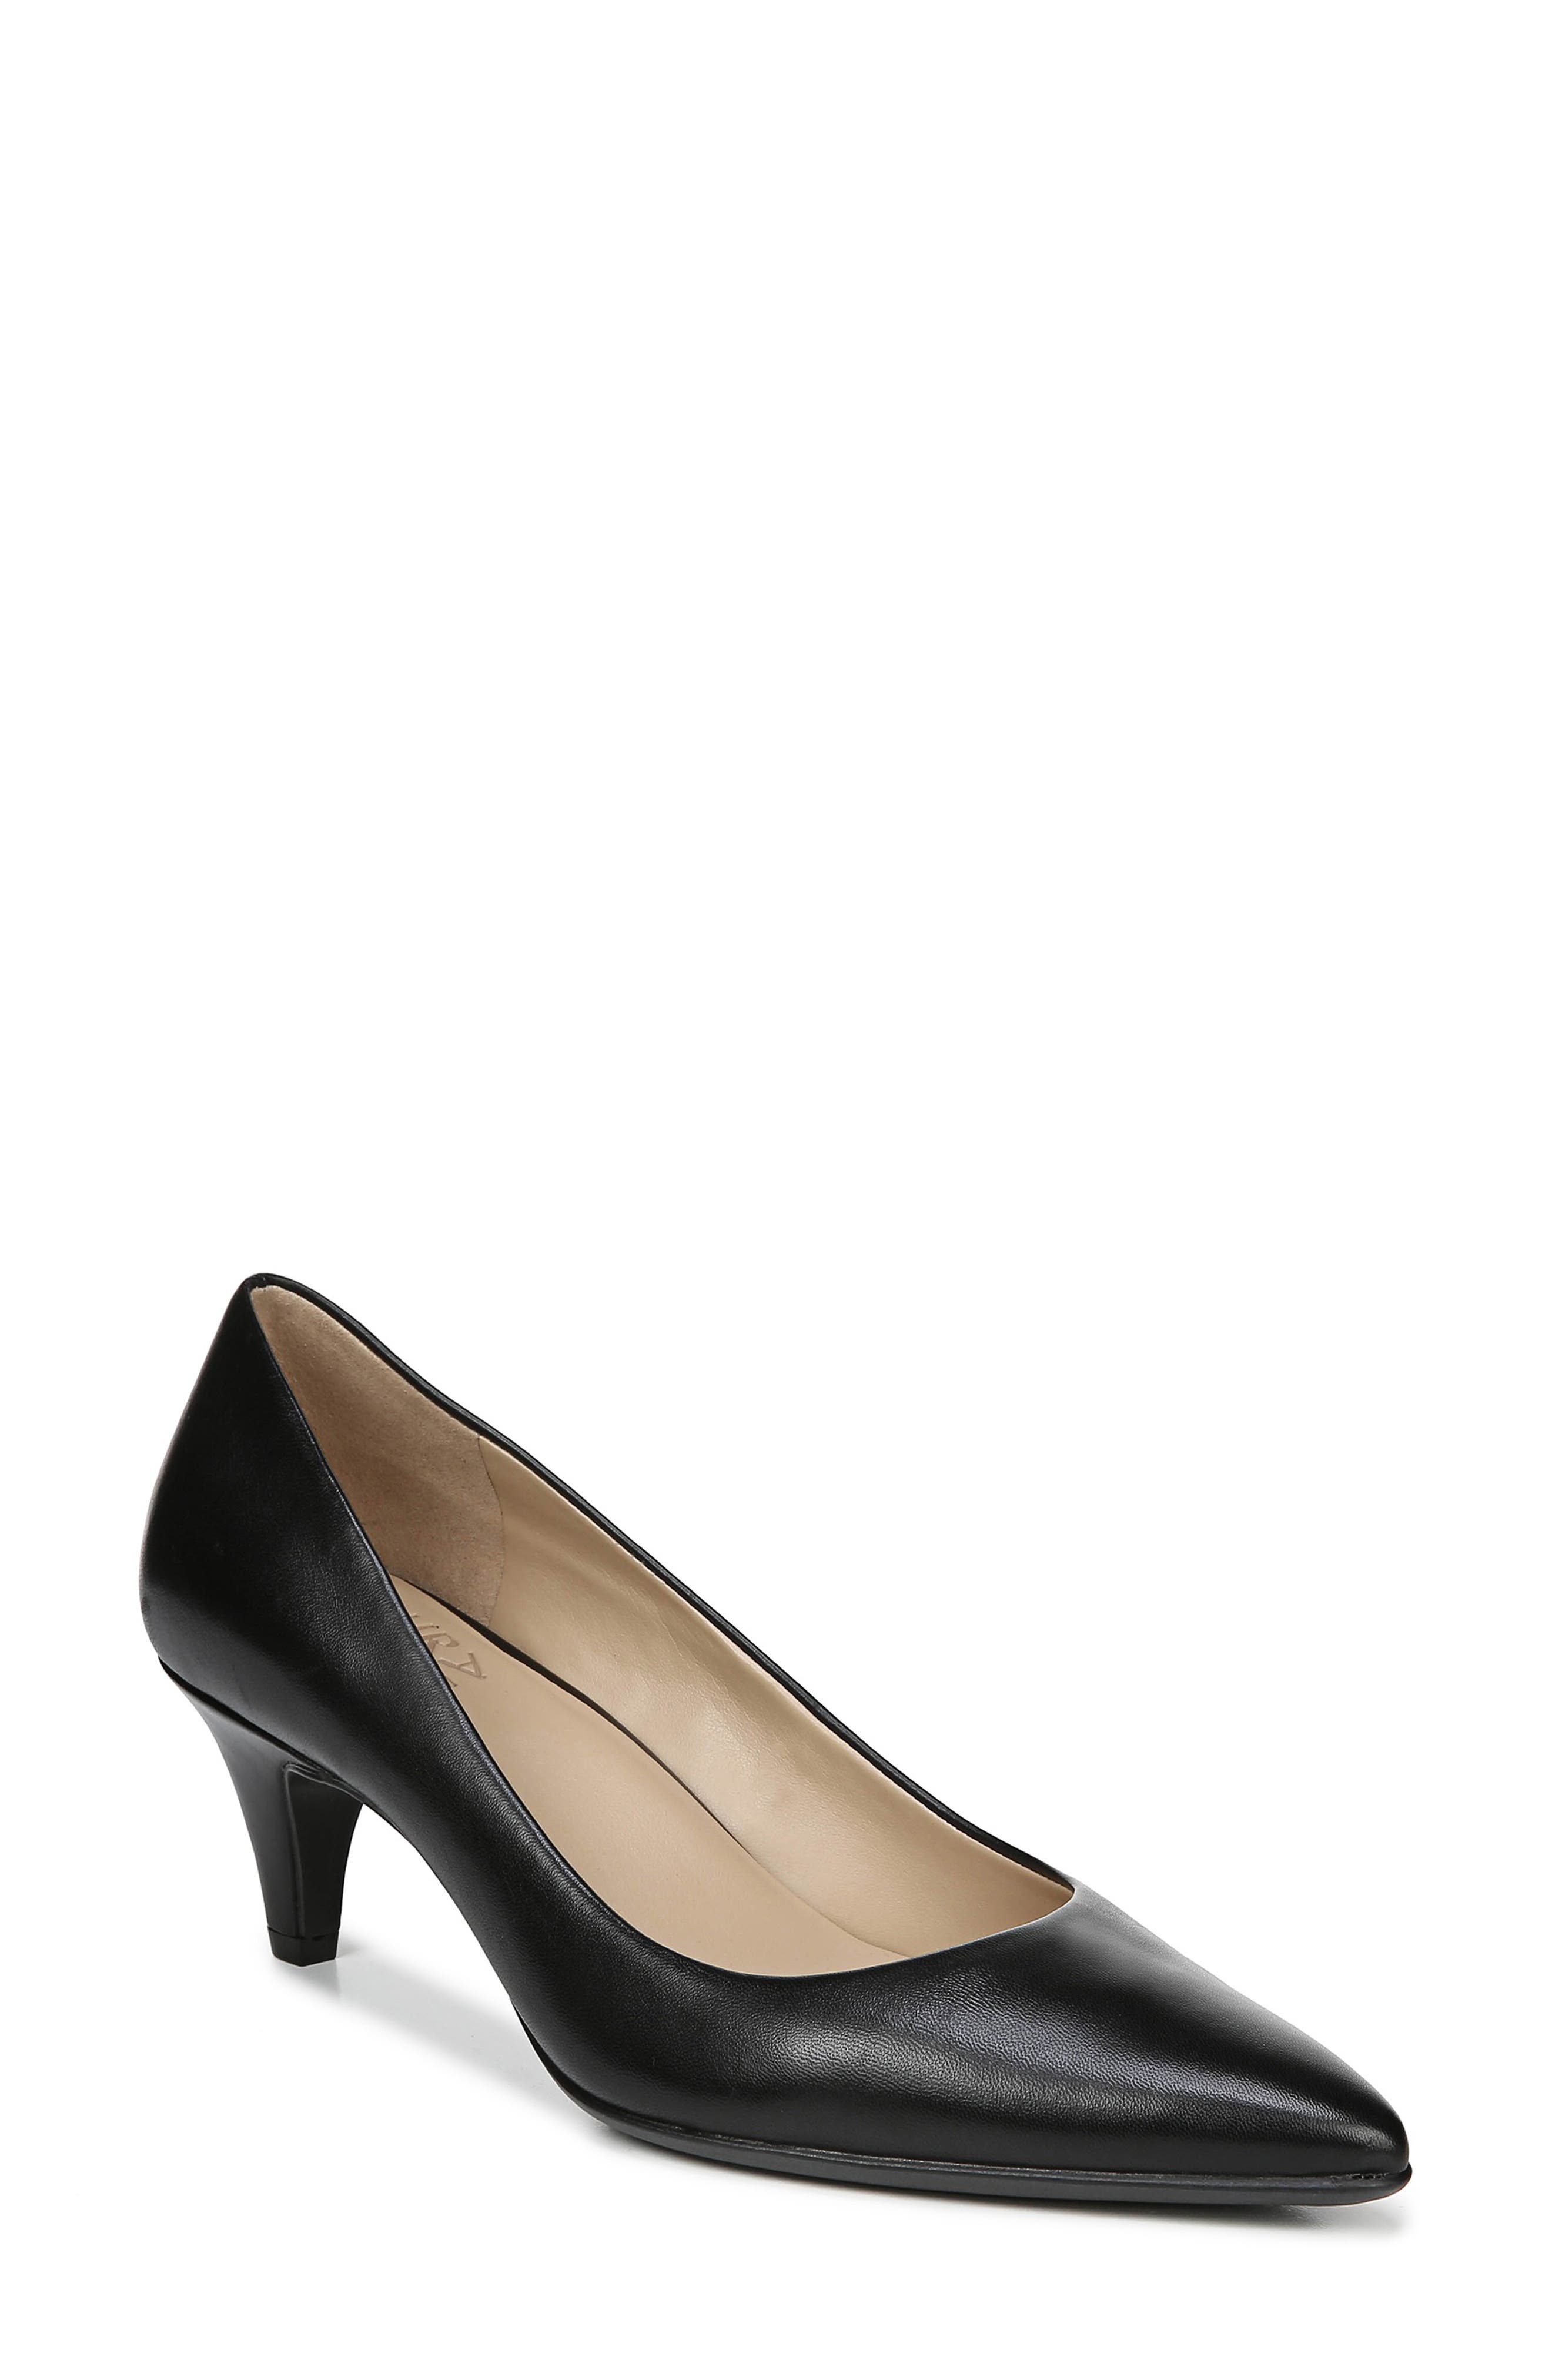 wide womens shoes nordstrom